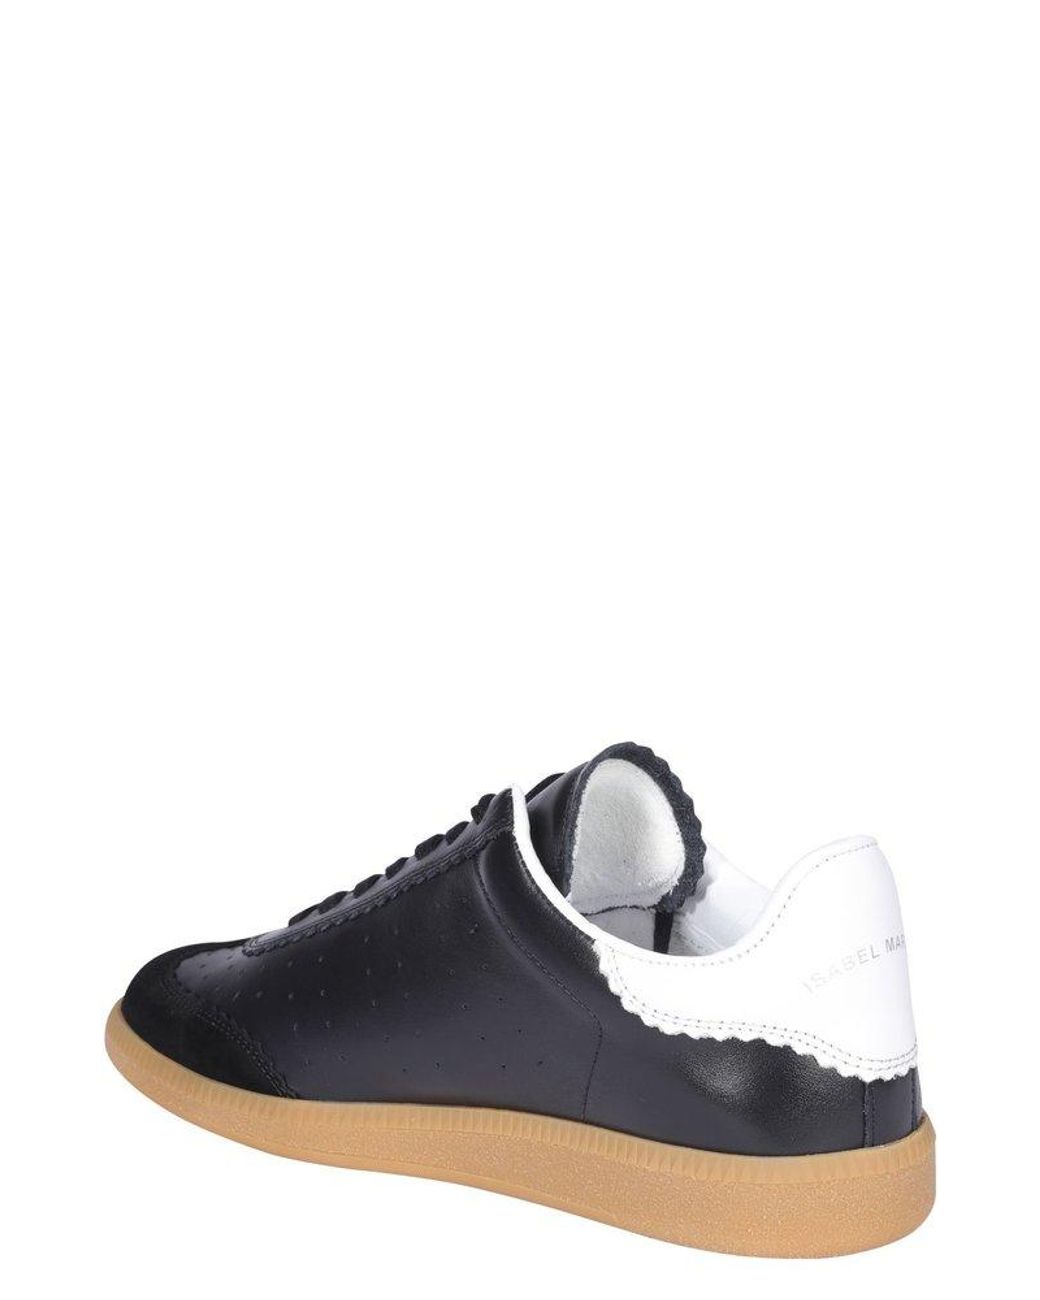 Isabel Marant Leather Bryce Sneakers in Black for Men | Lyst